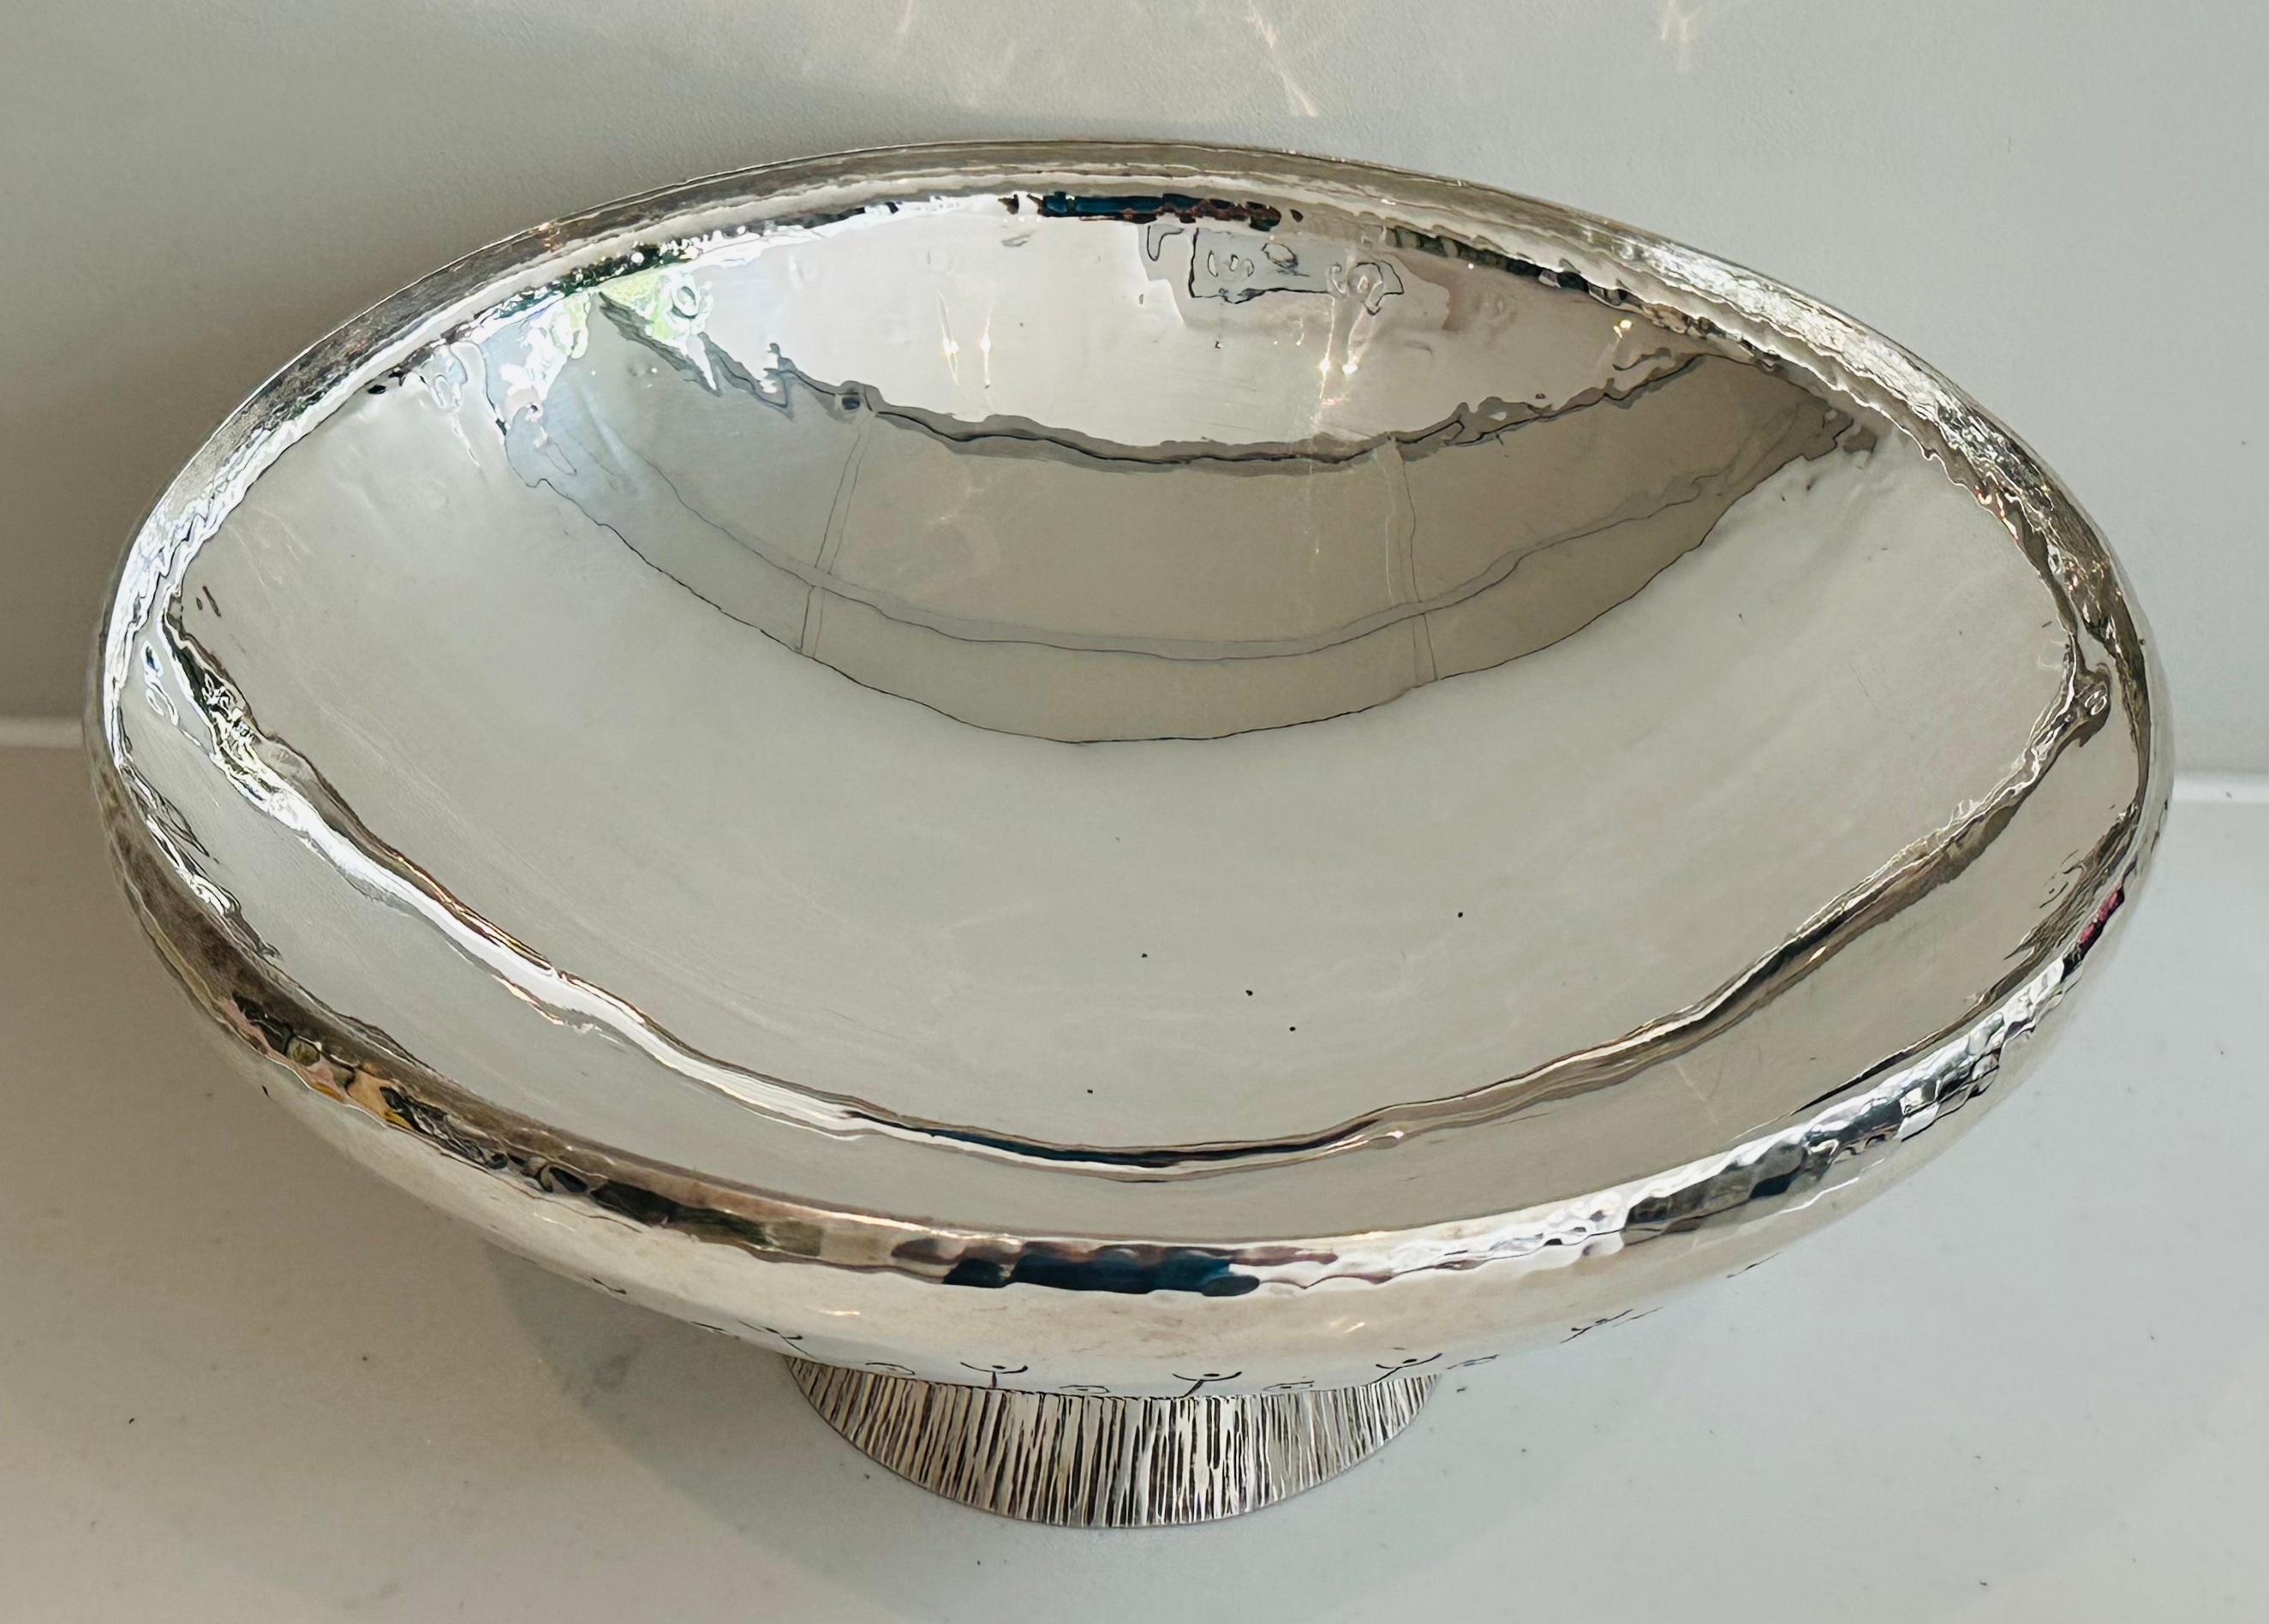 1980s English Silver Plated Decorative Hand-Hammered Serving or Display Bowl For Sale 7